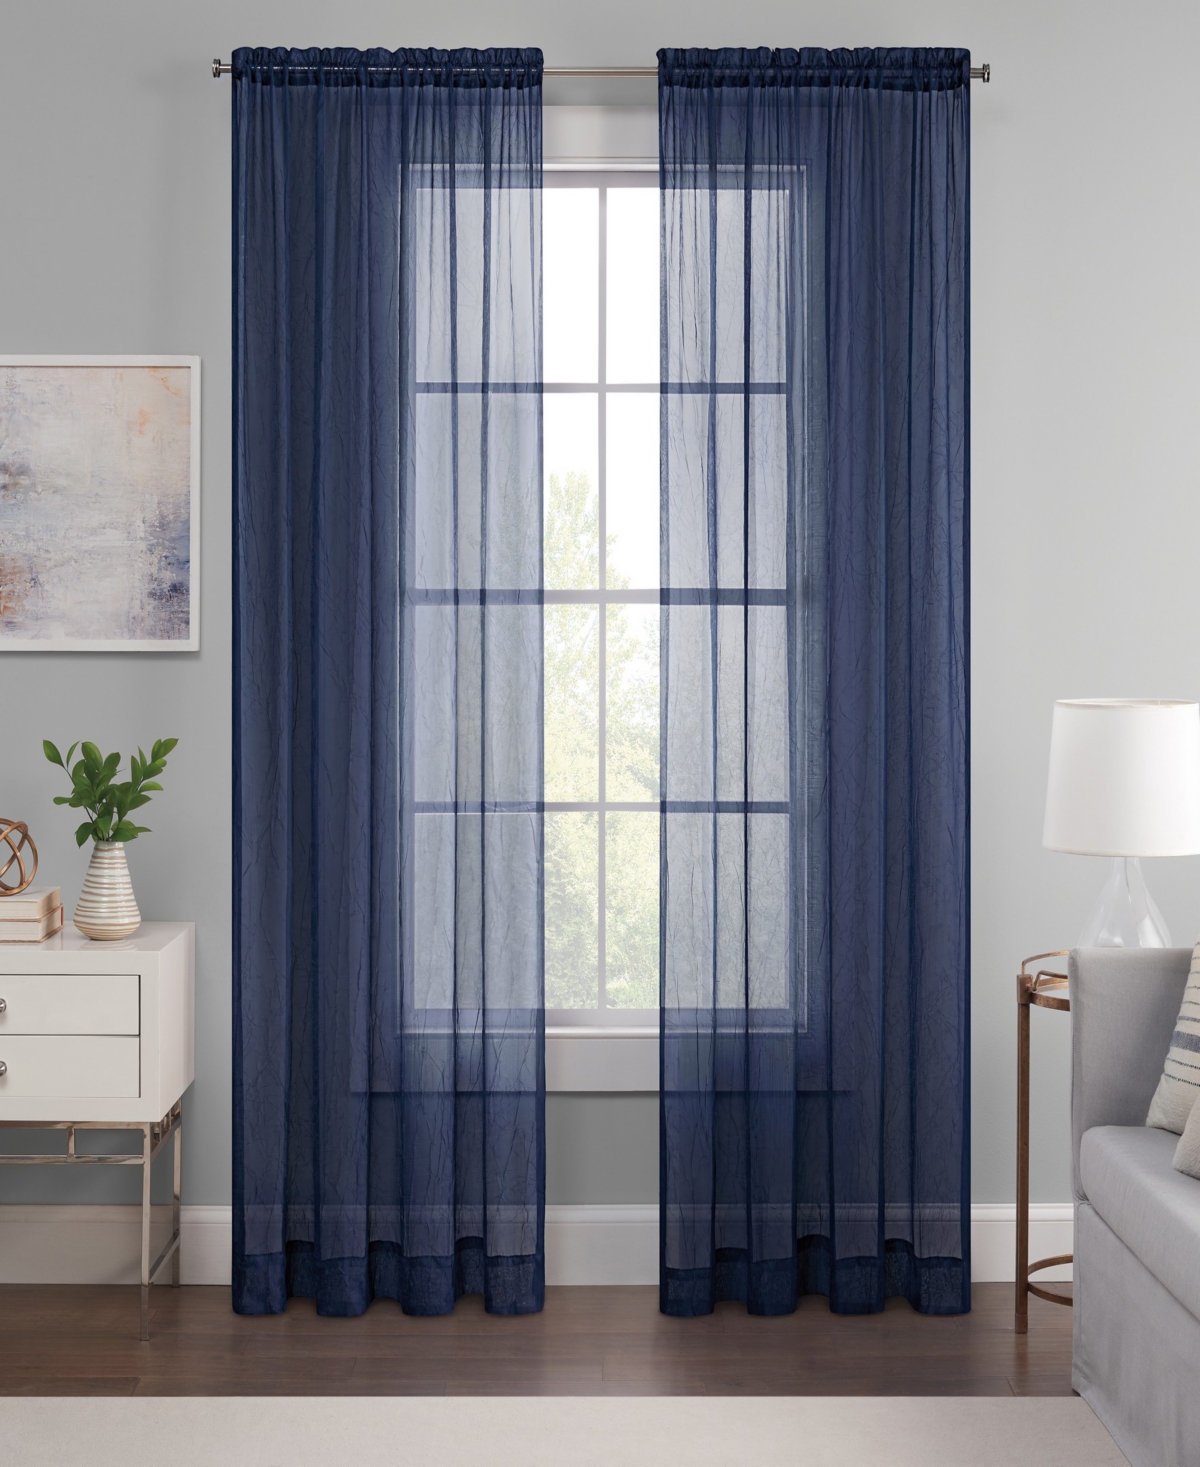 Eclipse Emina Crushed Sheer Voile Rod Pocket Curtain Panel, 52" X 63" In Navy